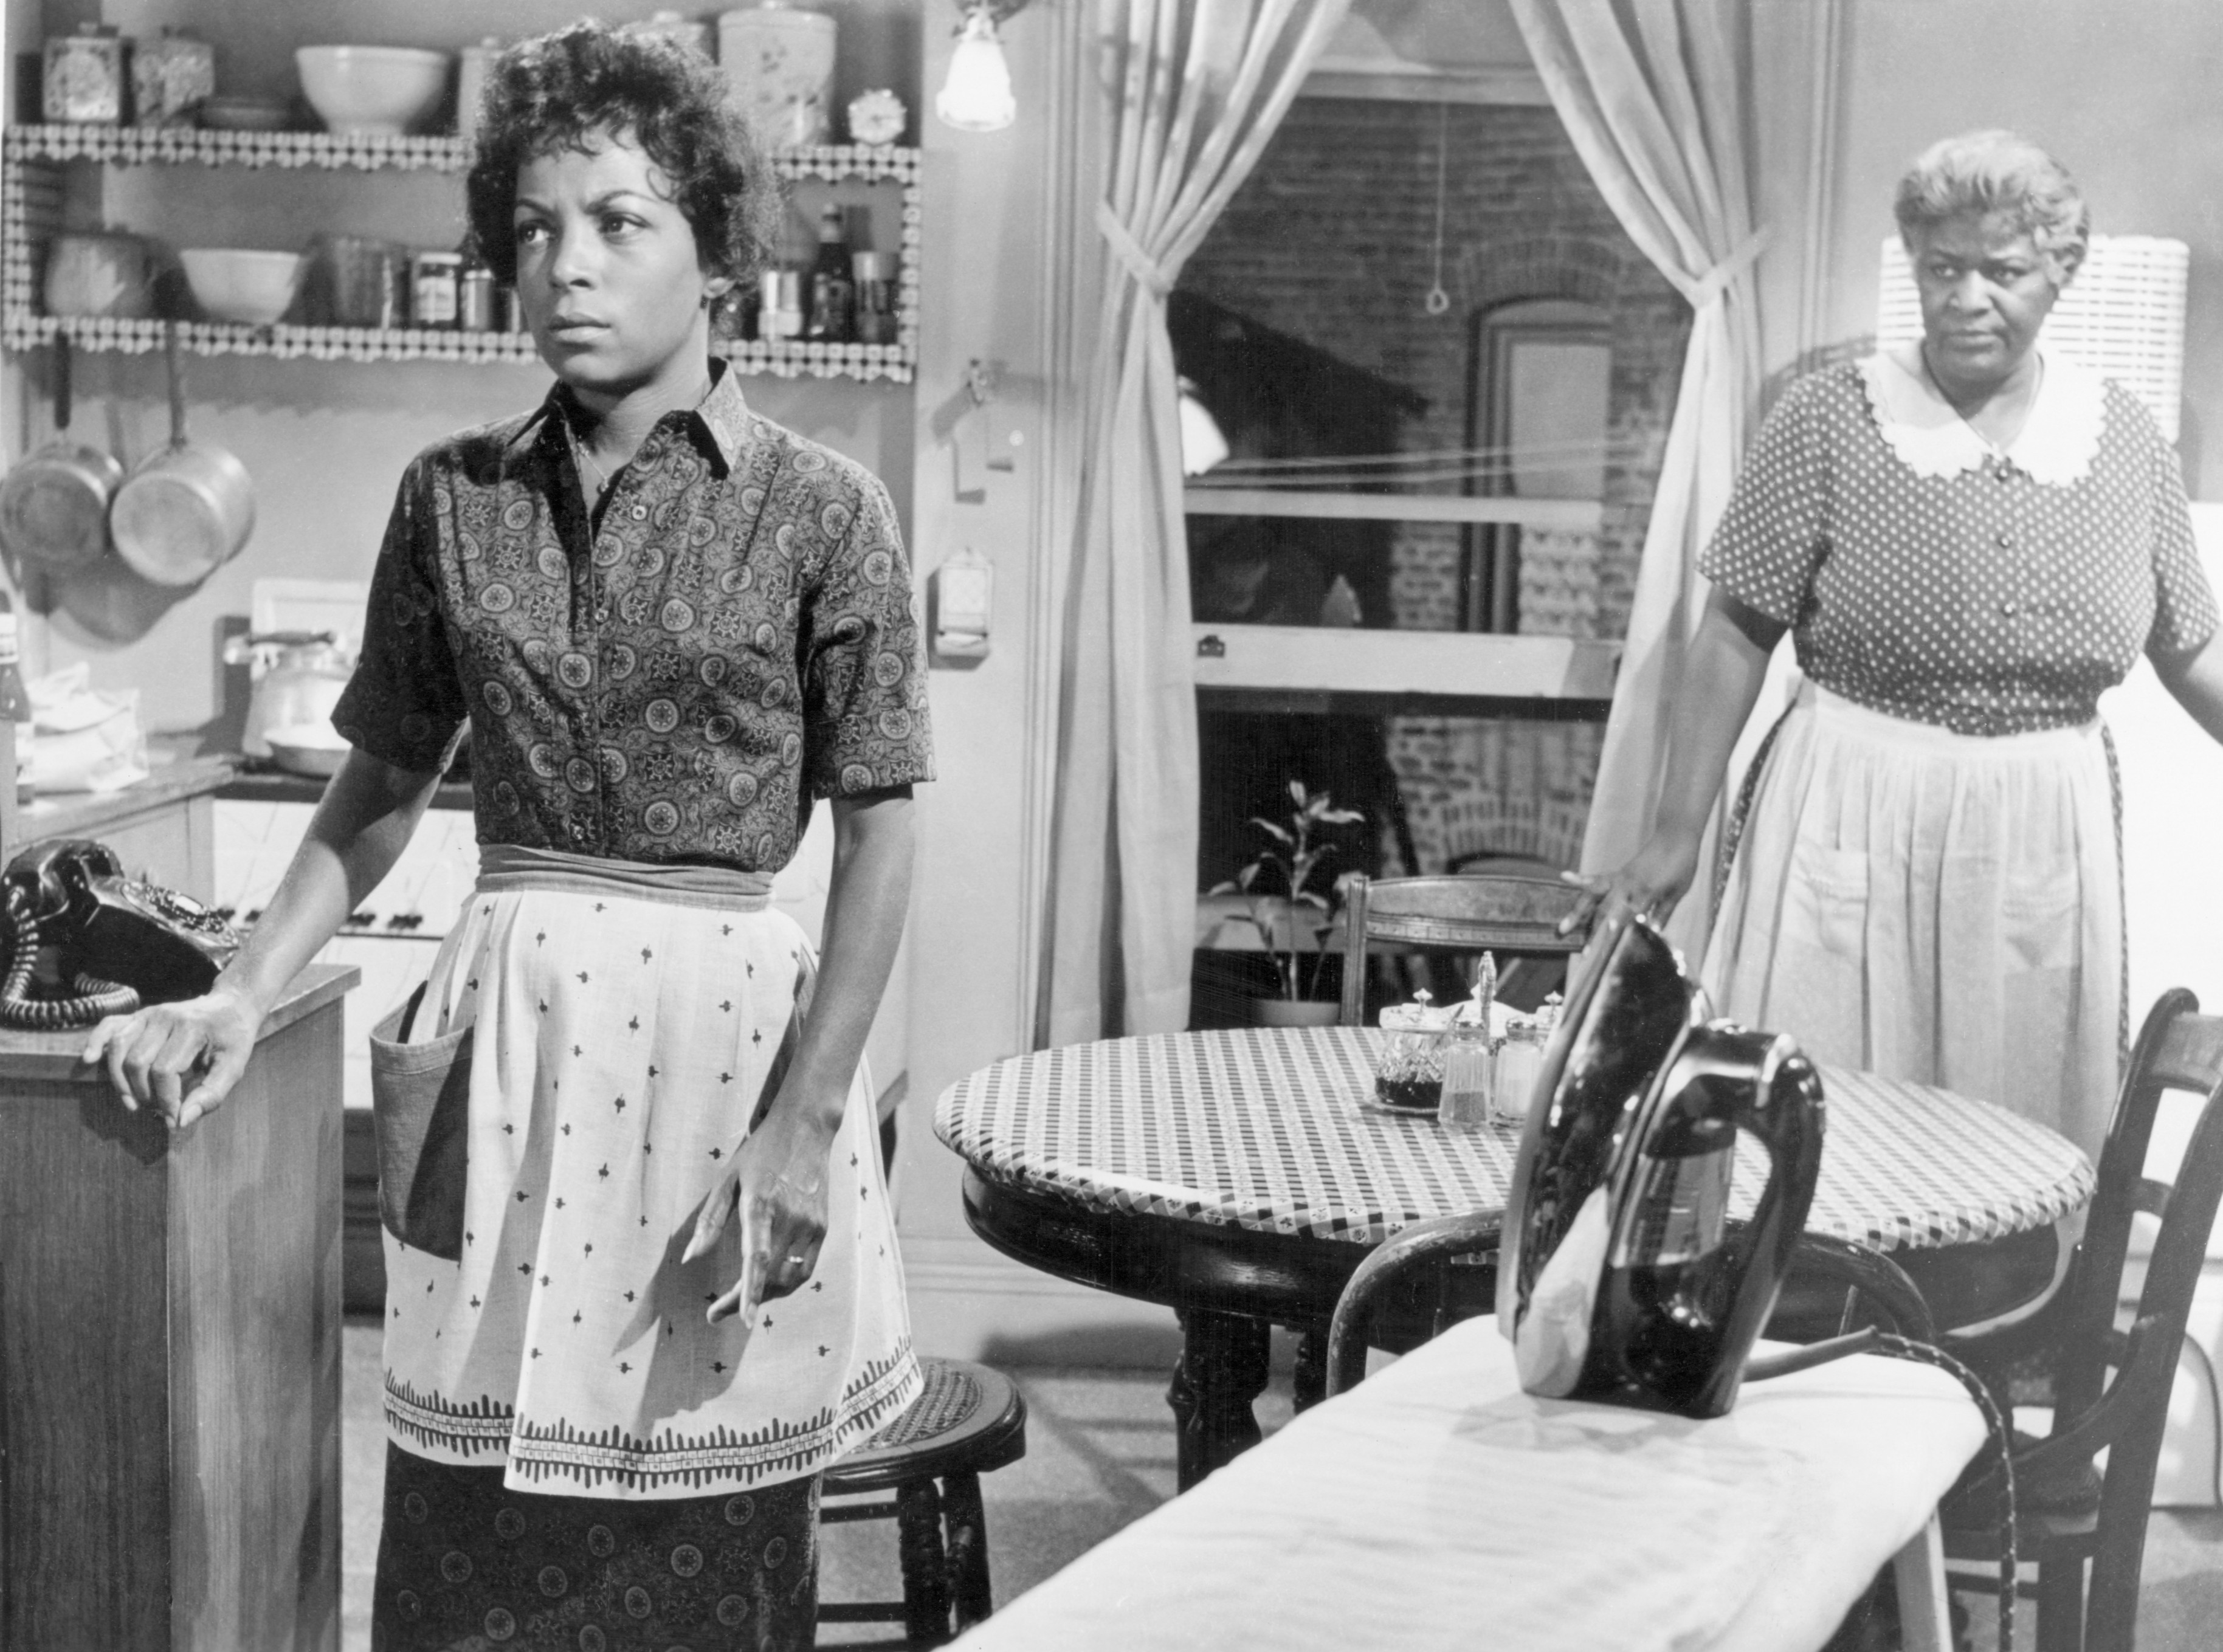 One of her best known roles was as Ruth Younger in the 1961 drama A Raisin in the Sun.